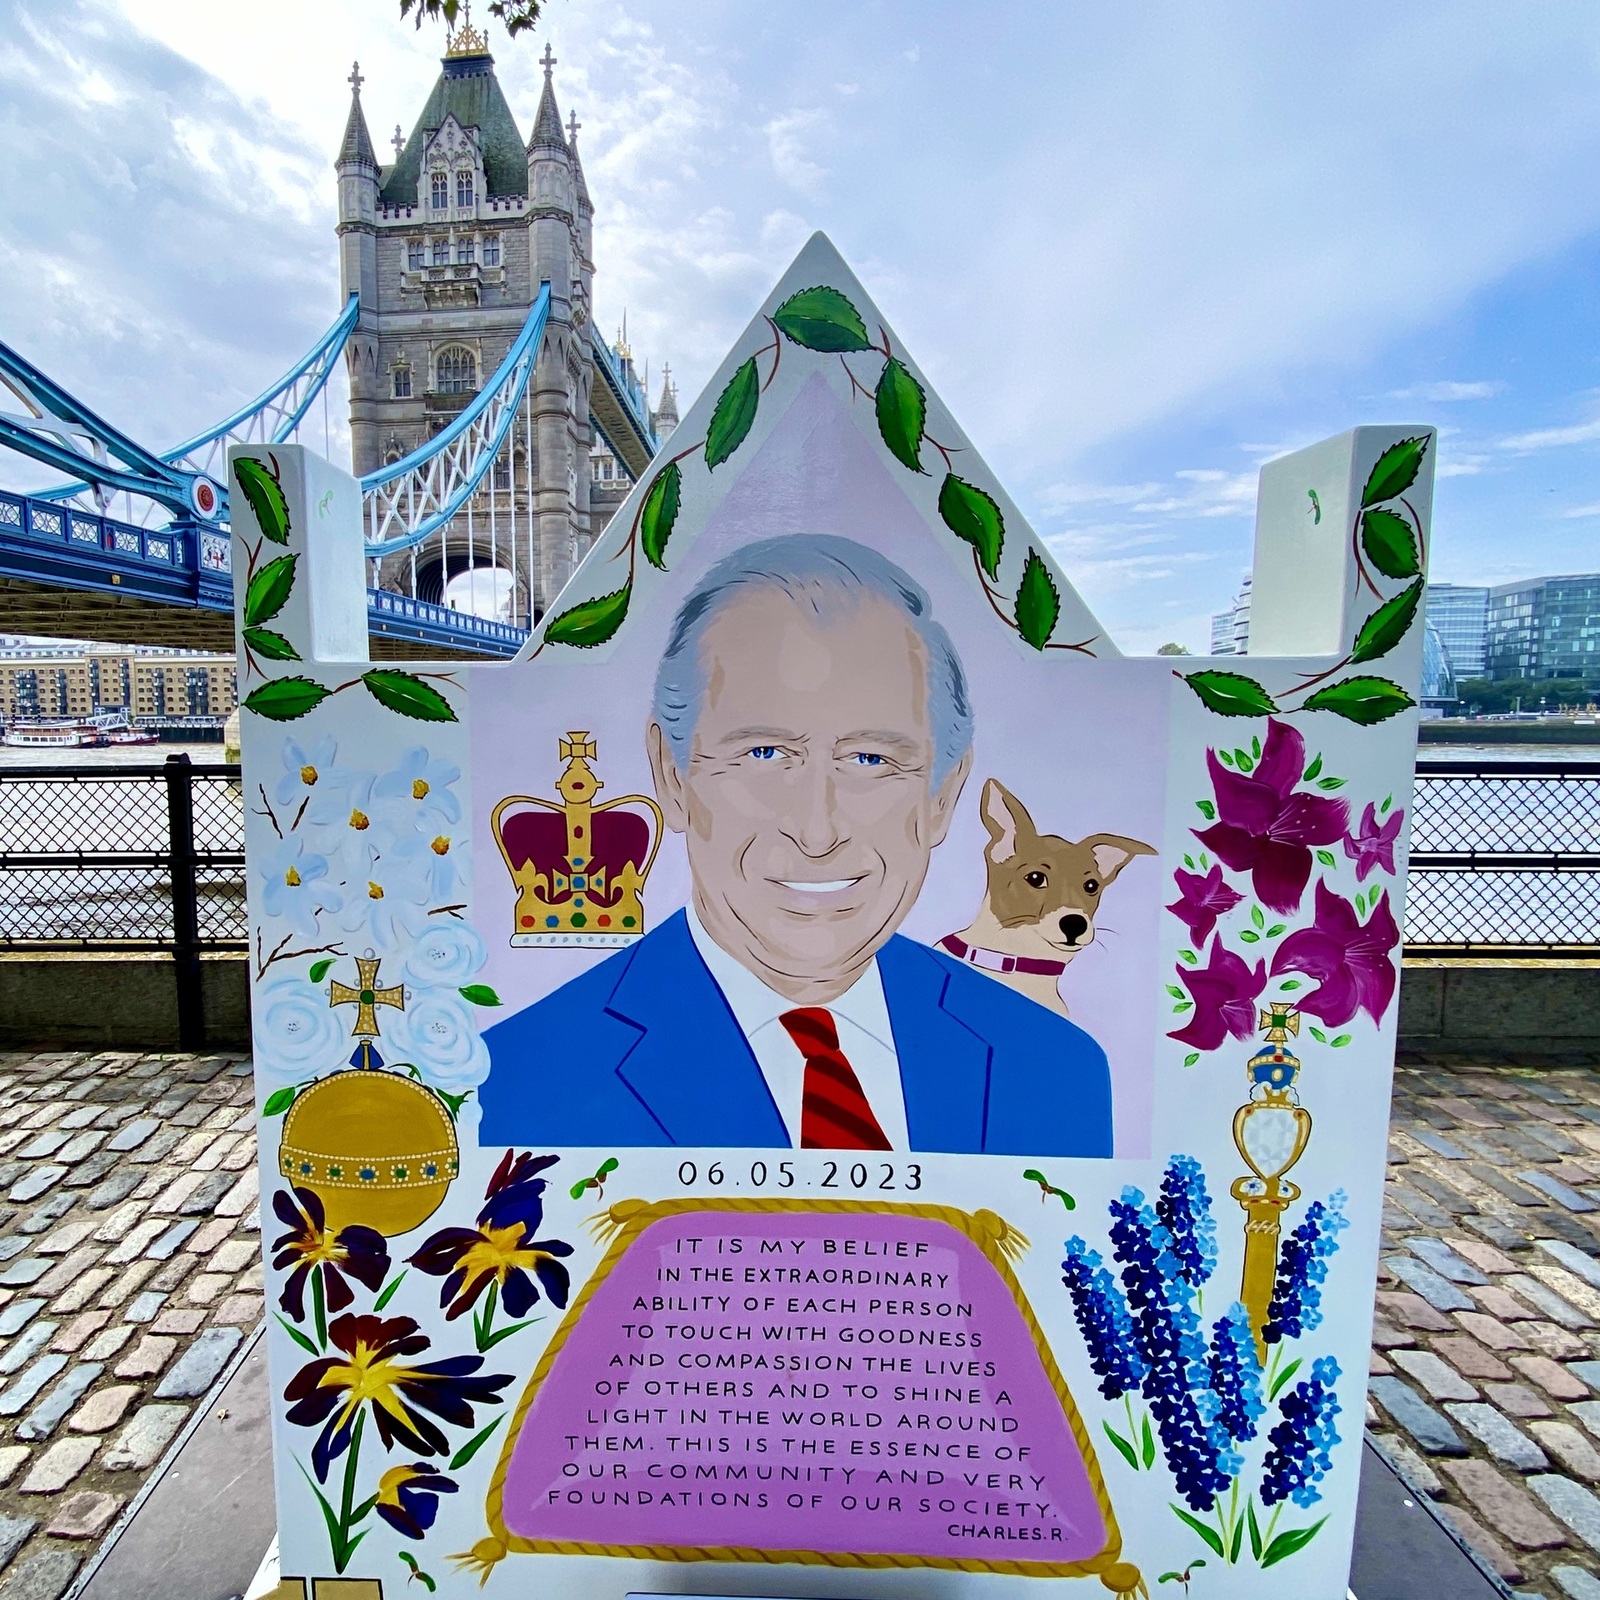 August 23 - A seat by the Thames?  15 winners were selected by HM’s Tower of London from the 15k entries from schools in a competition to mark the Coronation of His Majesty King Charles III.